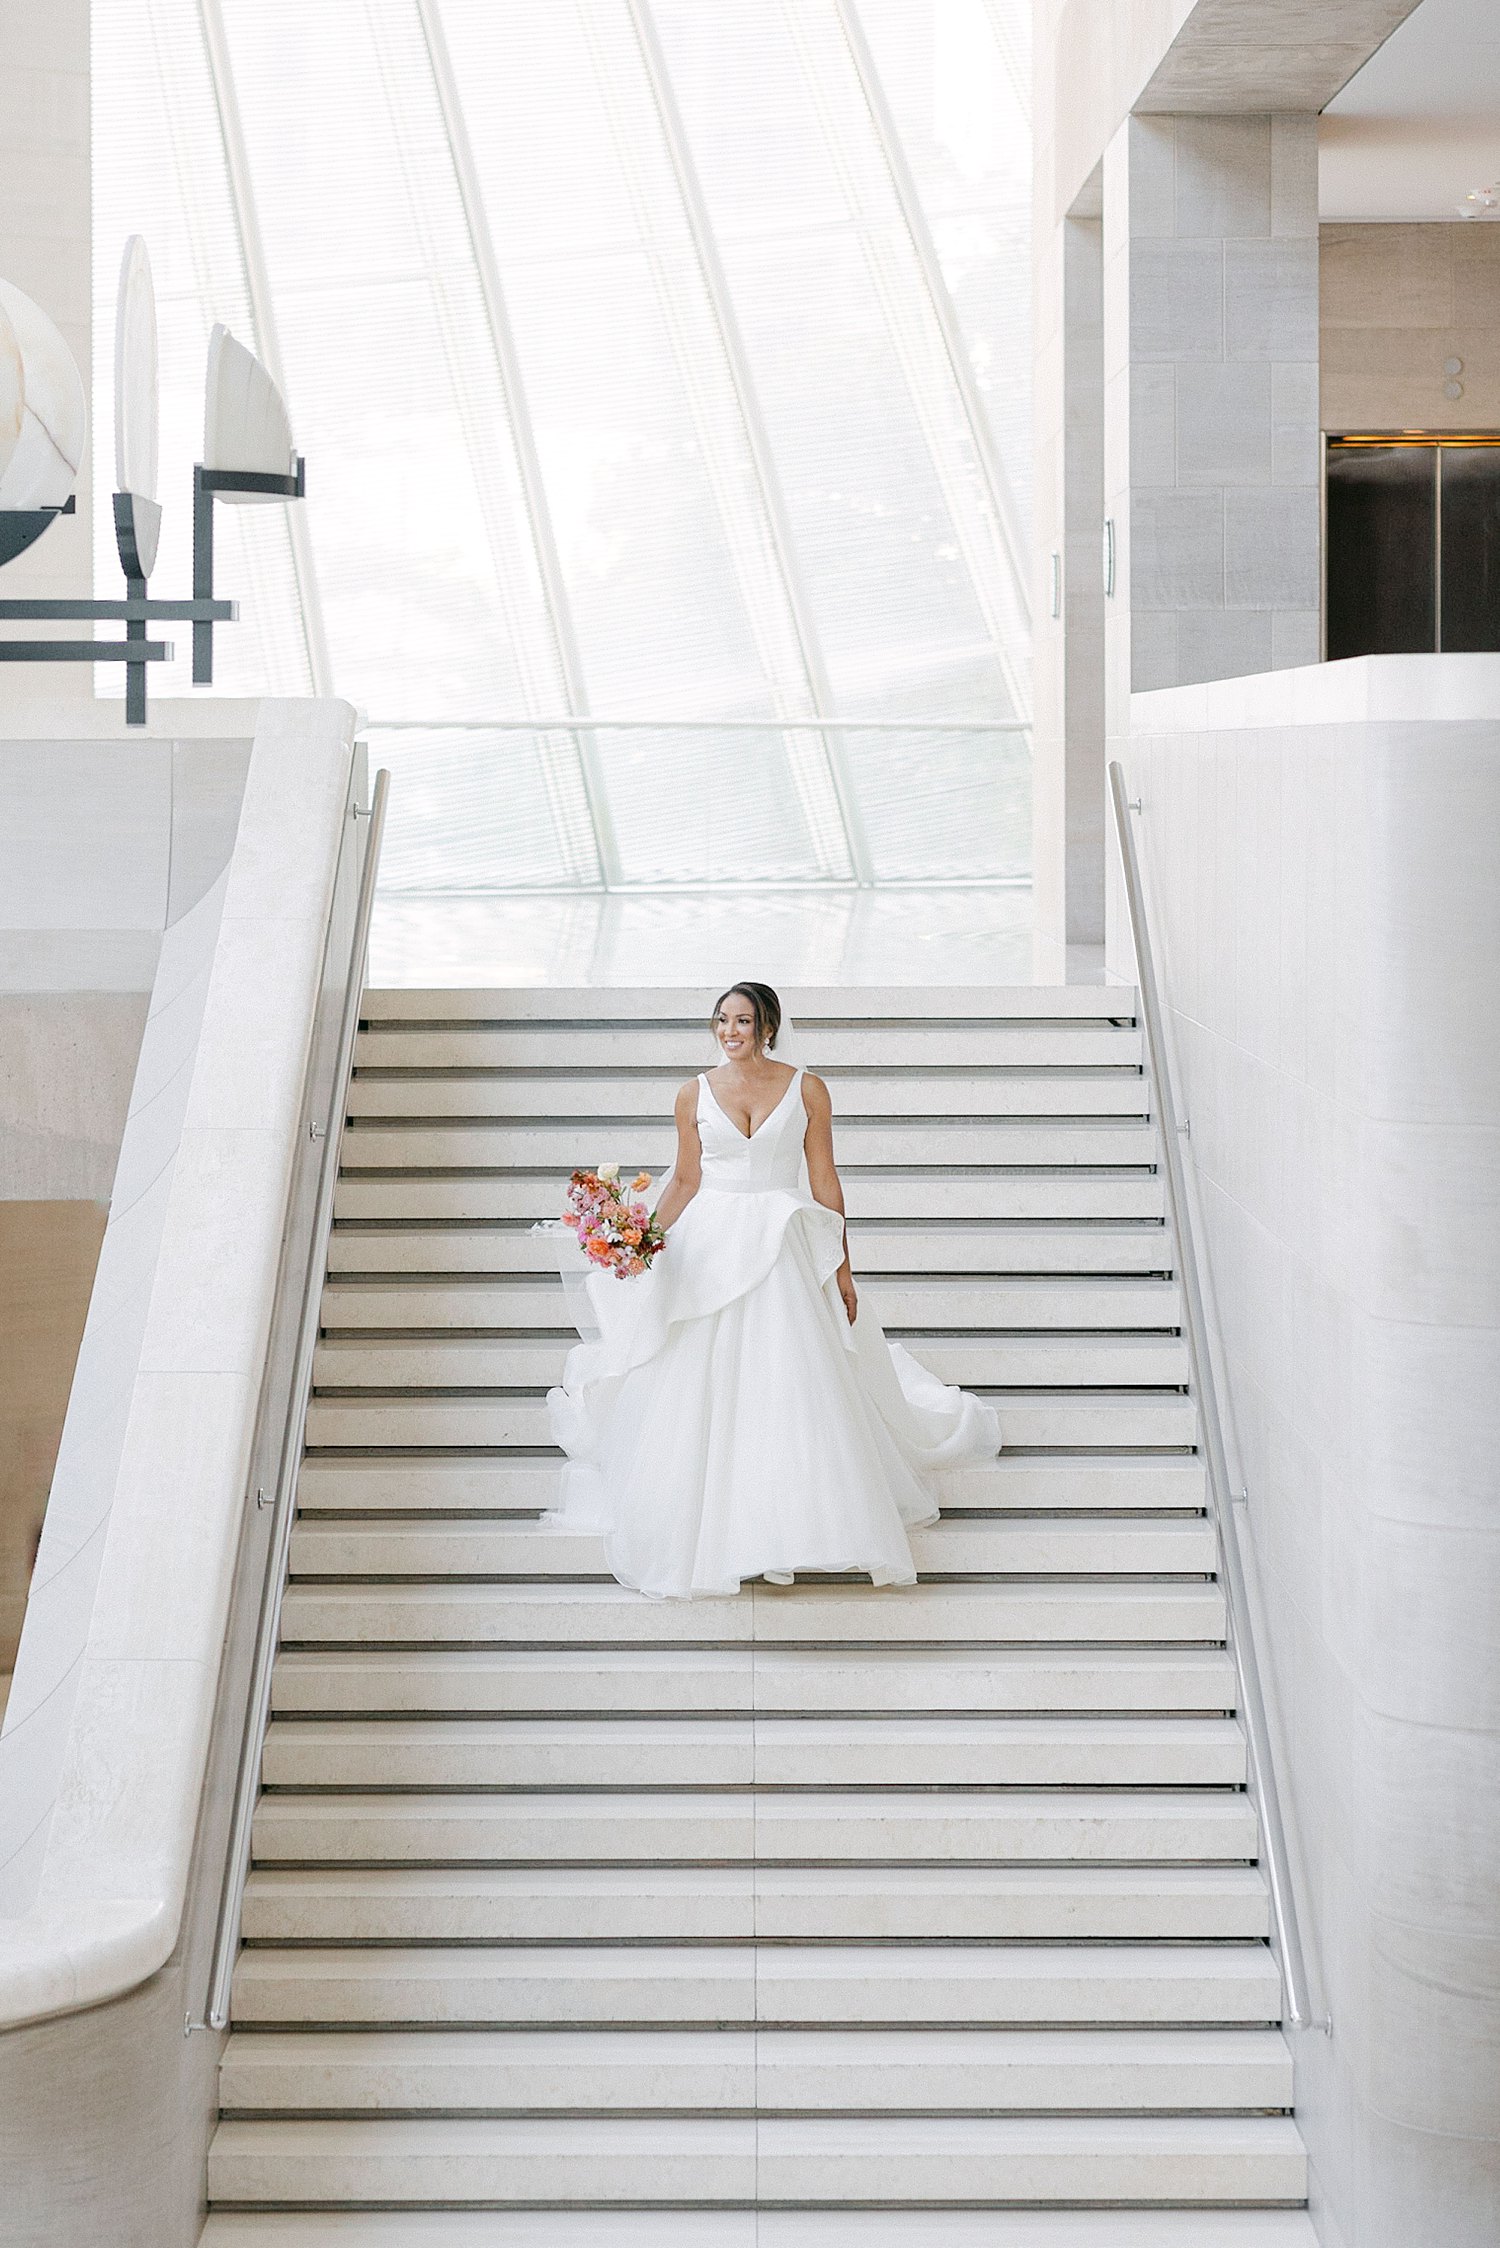 Bride in white wedding dress holding bouquet and walking down stair case Dallas Arts District